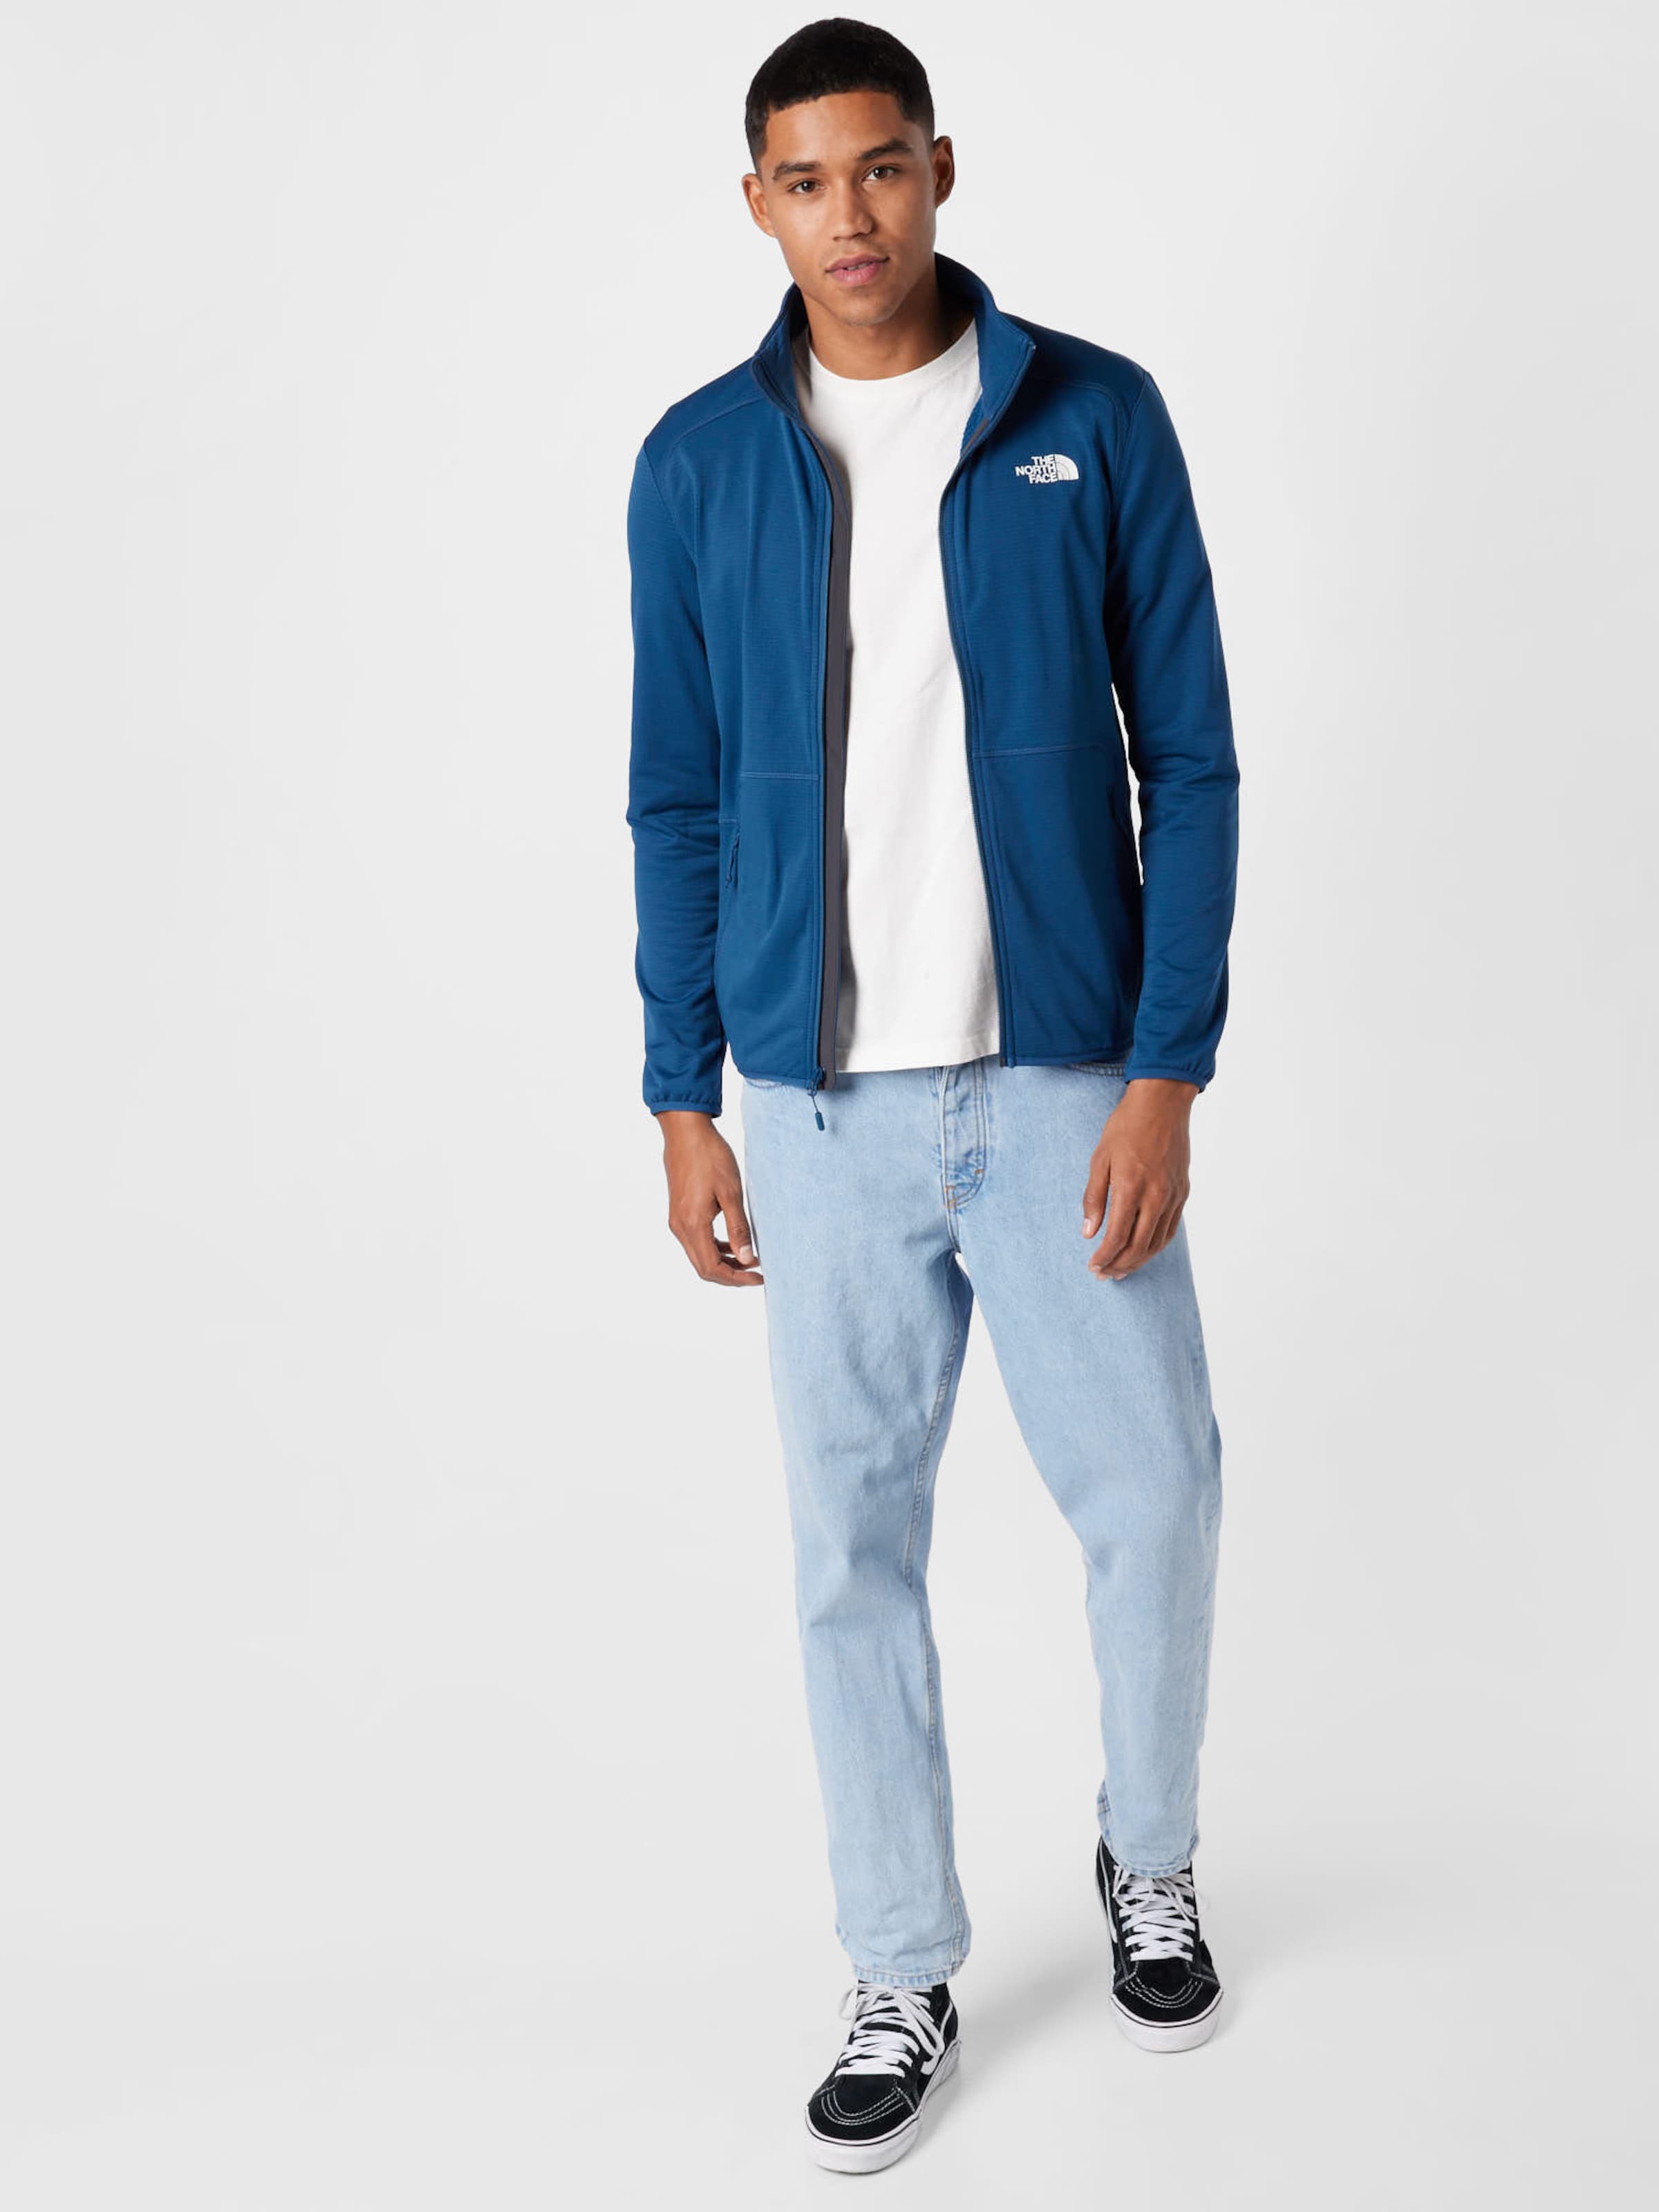 Männer Sportbekleidung THE NORTH FACE Jacke 'Quest' in Blau - GN17076